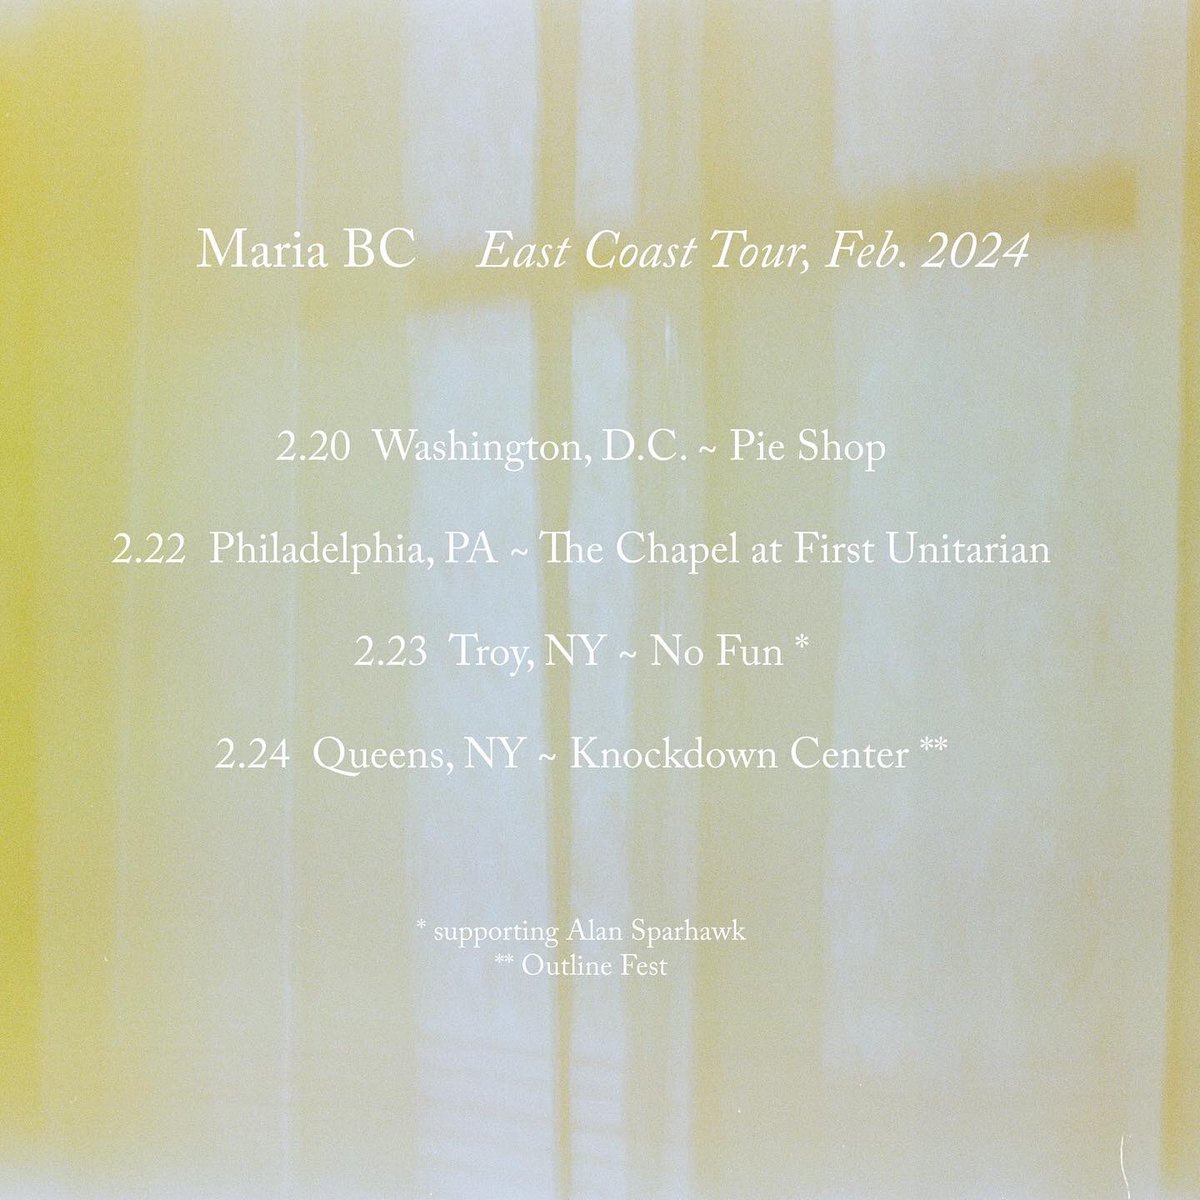 east coast here i come ~ tix on sale friday FEB 20 - Washington, D.C. @ Pie Shop FEB 22 - Philly @ The Chapel at Forst Unitarian Church FEB 23 - Troy, NY @ No Fun (supporting @lowtheband ) FEB 24 - Queens, NY @ Knockdown Center (for Outline Fest)